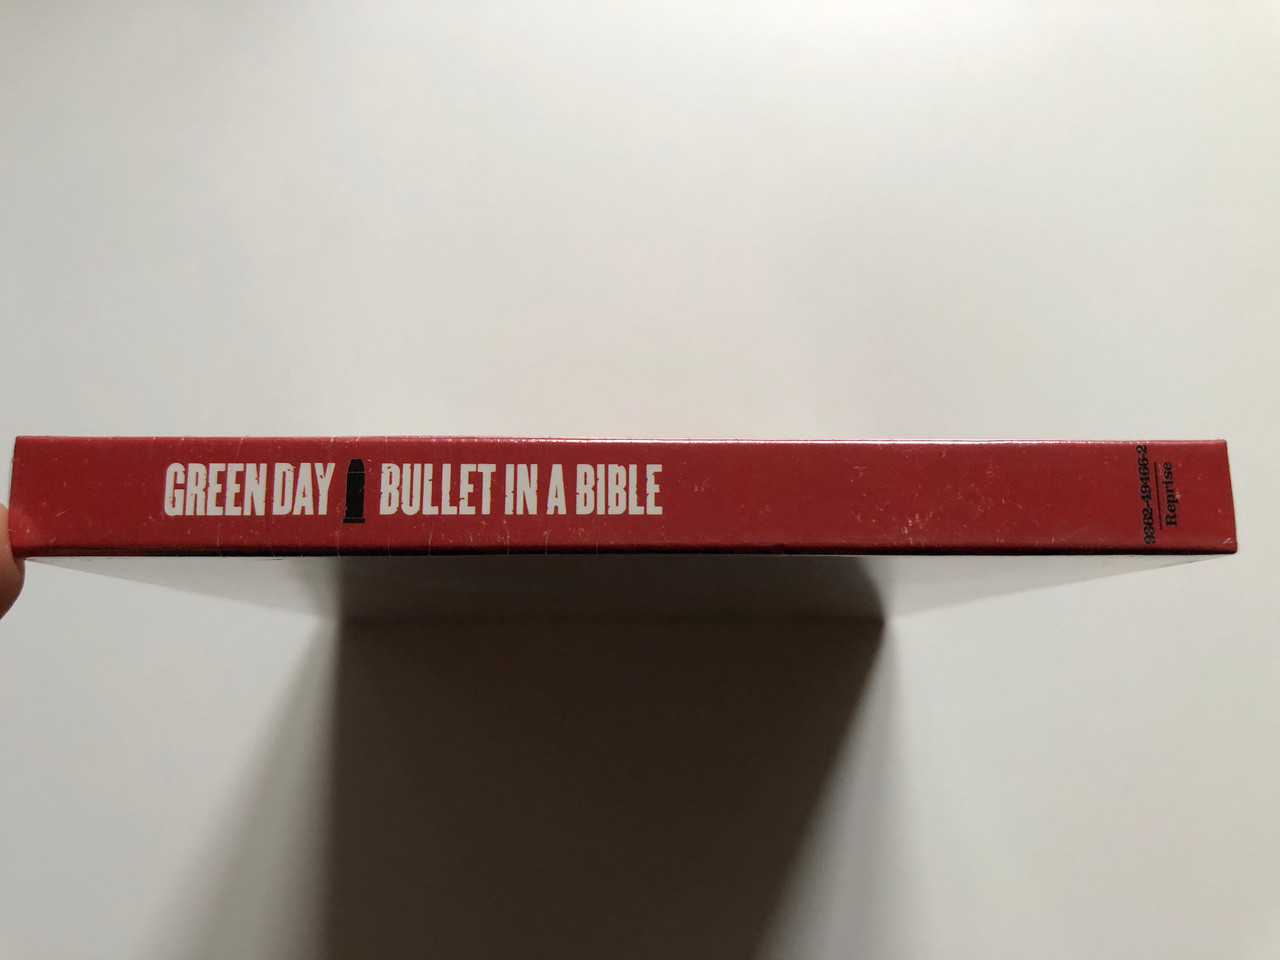 https://cdn10.bigcommerce.com/s-62bdpkt7pb/products/0/images/256069/Green_Day_Bullet_In_A_Bible_Their_first_ever_Live_CD_and_DVD_takes_you_on-stage_behind_the_scenes_includes_in-depth_interviews_of_the_American_Idiot_tour_Reprise_Records_Audio_CD_D_3__41645.1665593664.1280.1280.JPG?c=2&_gl=1*cli8dr*_ga*MjA2NTIxMjE2MC4xNTkwNTEyNTMy*_ga_WS2VZYPC6G*MTY2NTU4NTUzOC41OTAuMS4xNjY1NTkzNDIyLjU4LjAuMA..